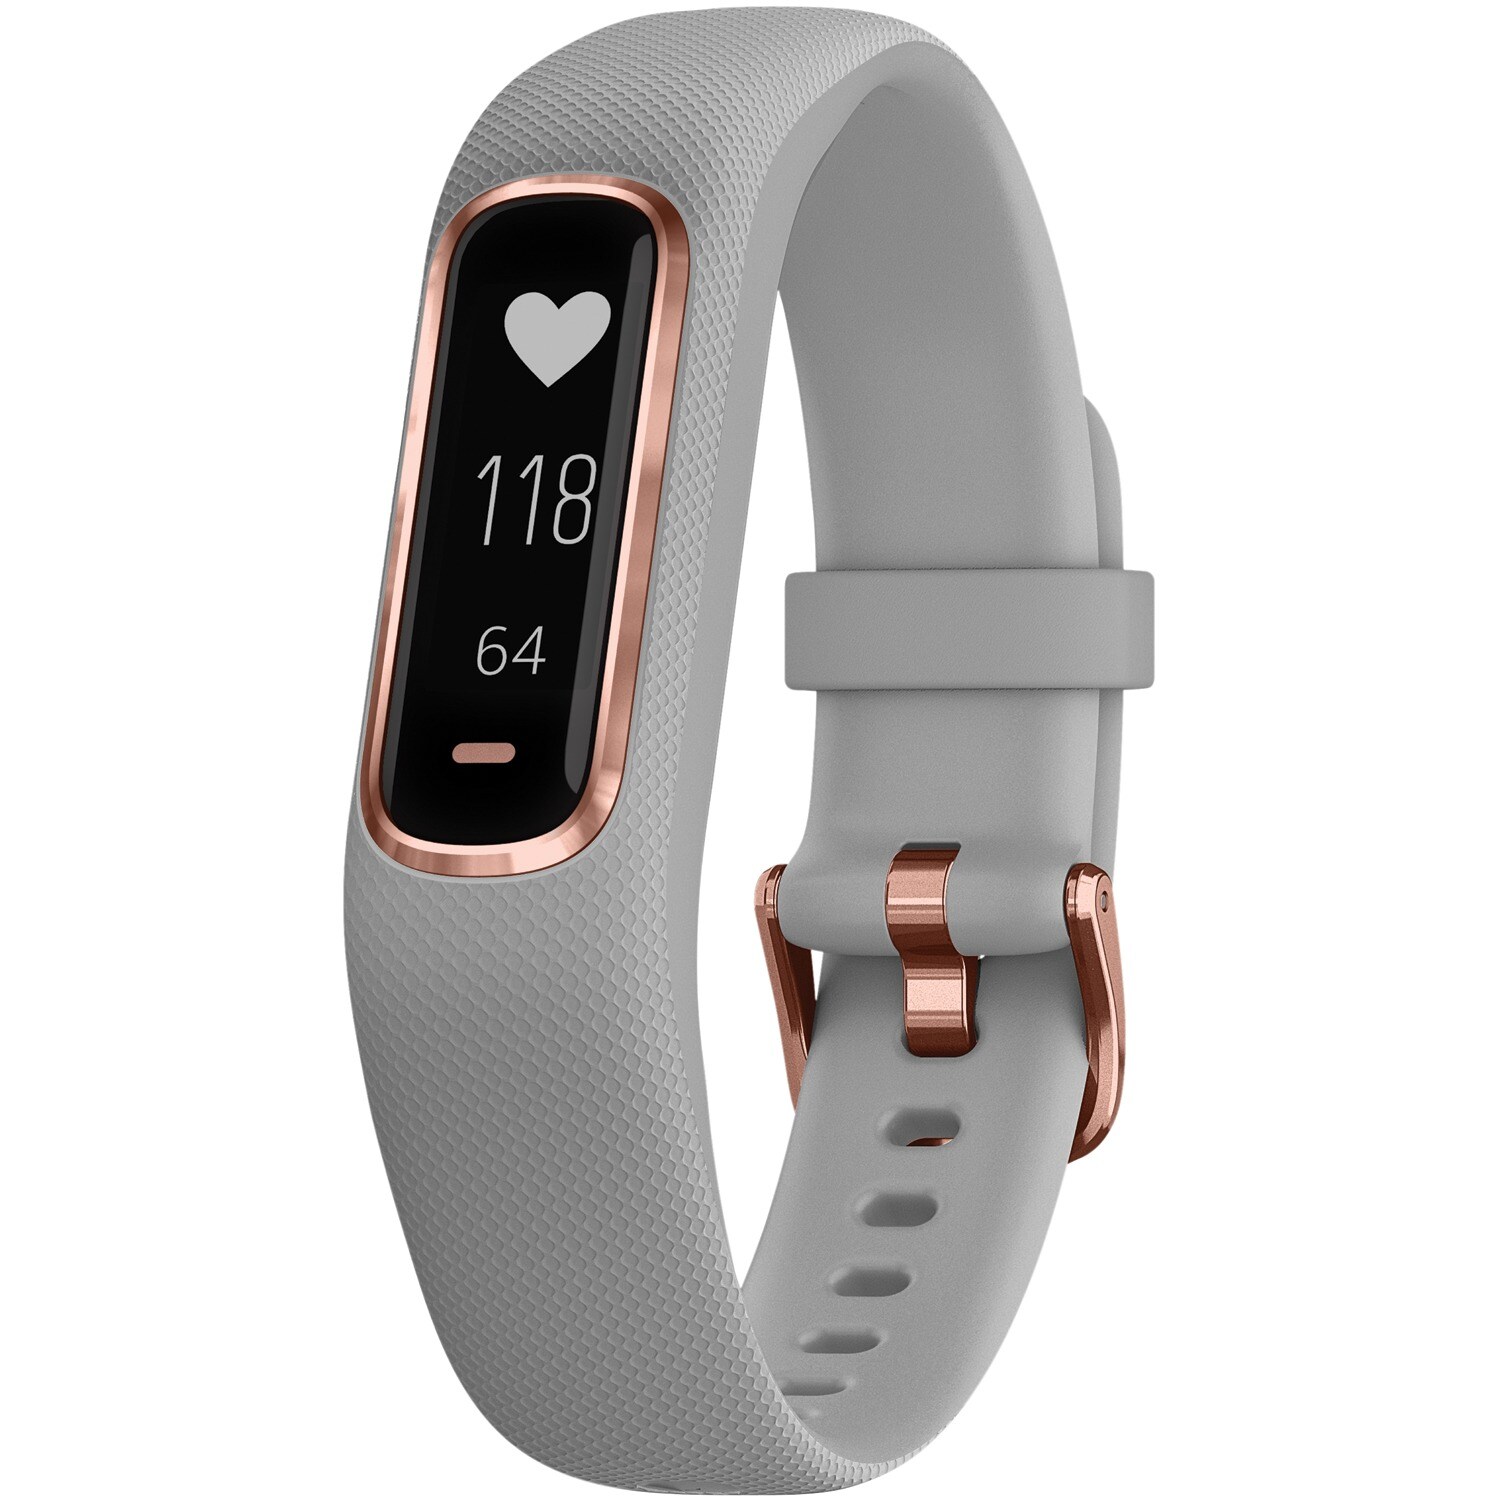 Vivosmart Monitor Garmin Tracker Heart at Fitness Enabled and Step Counter, 4 Rate with Gps